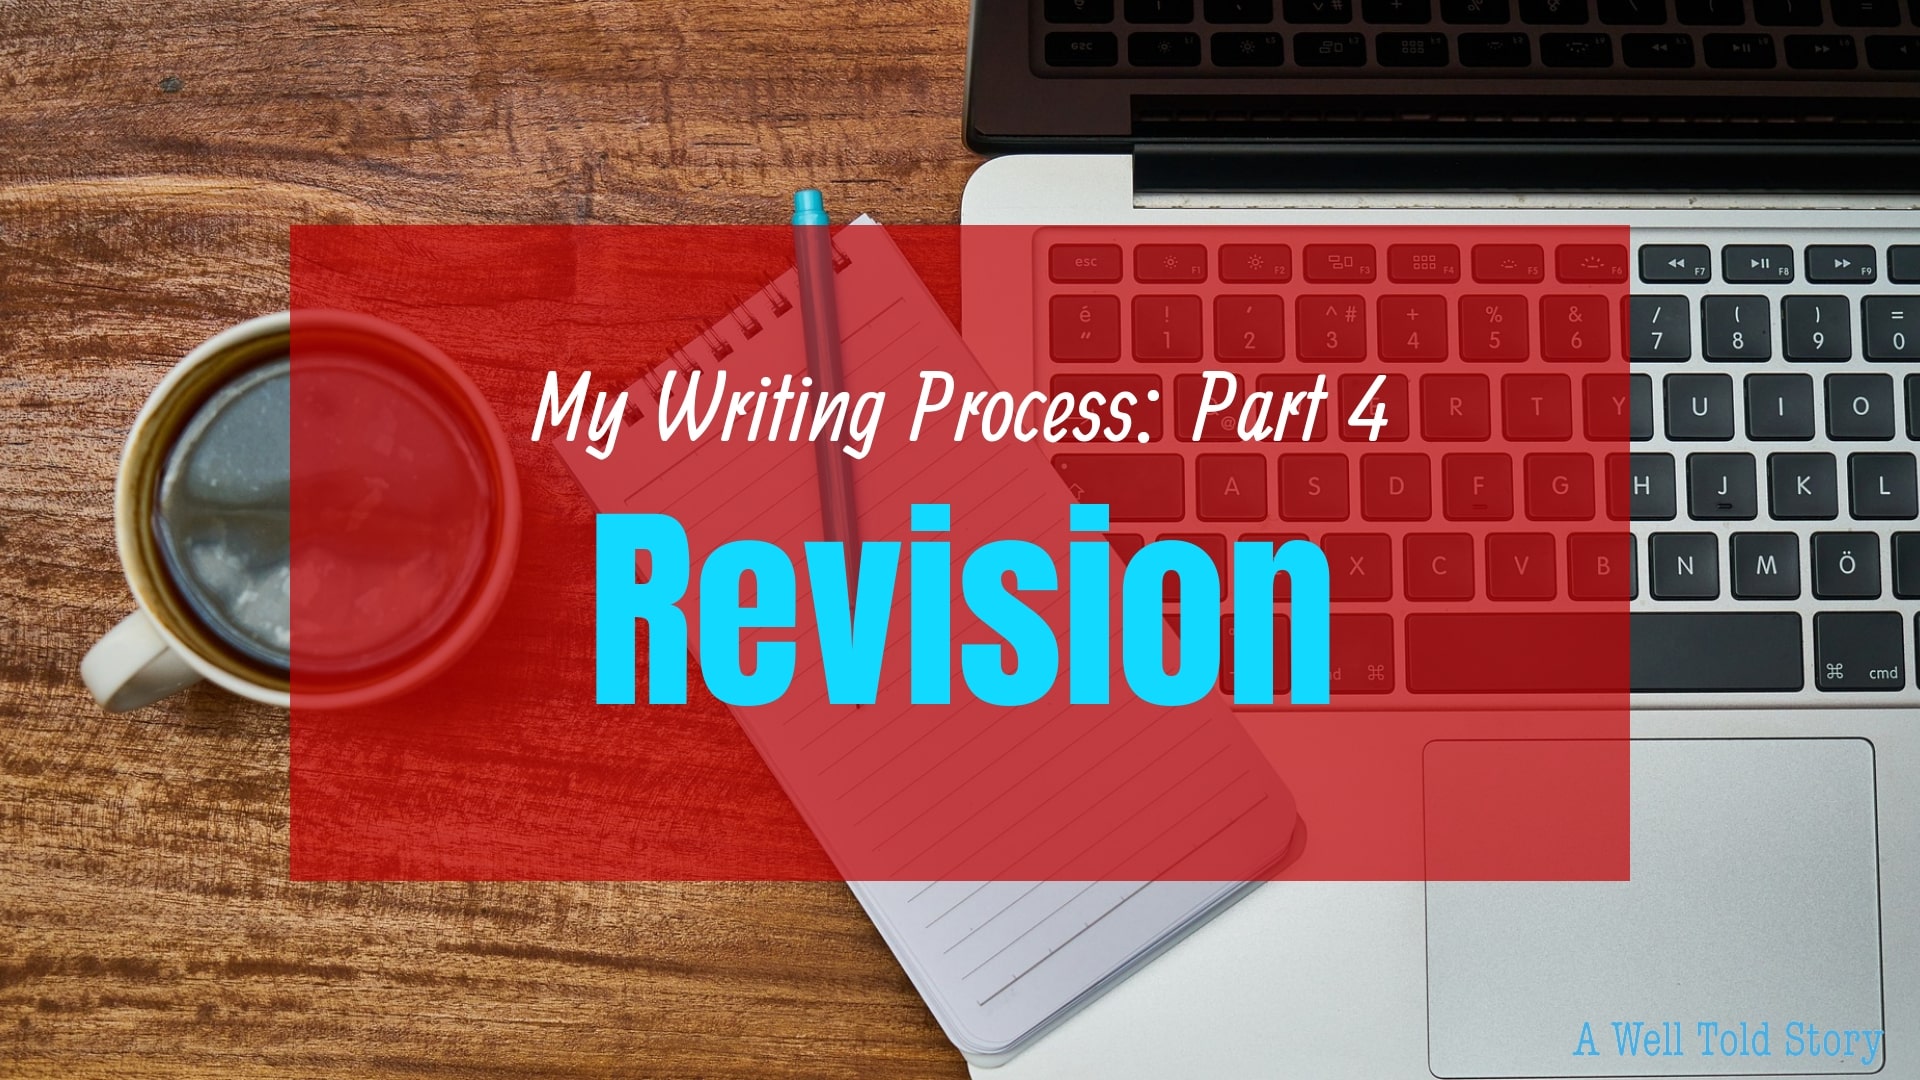 My Writing Process: Part 4 - Revision